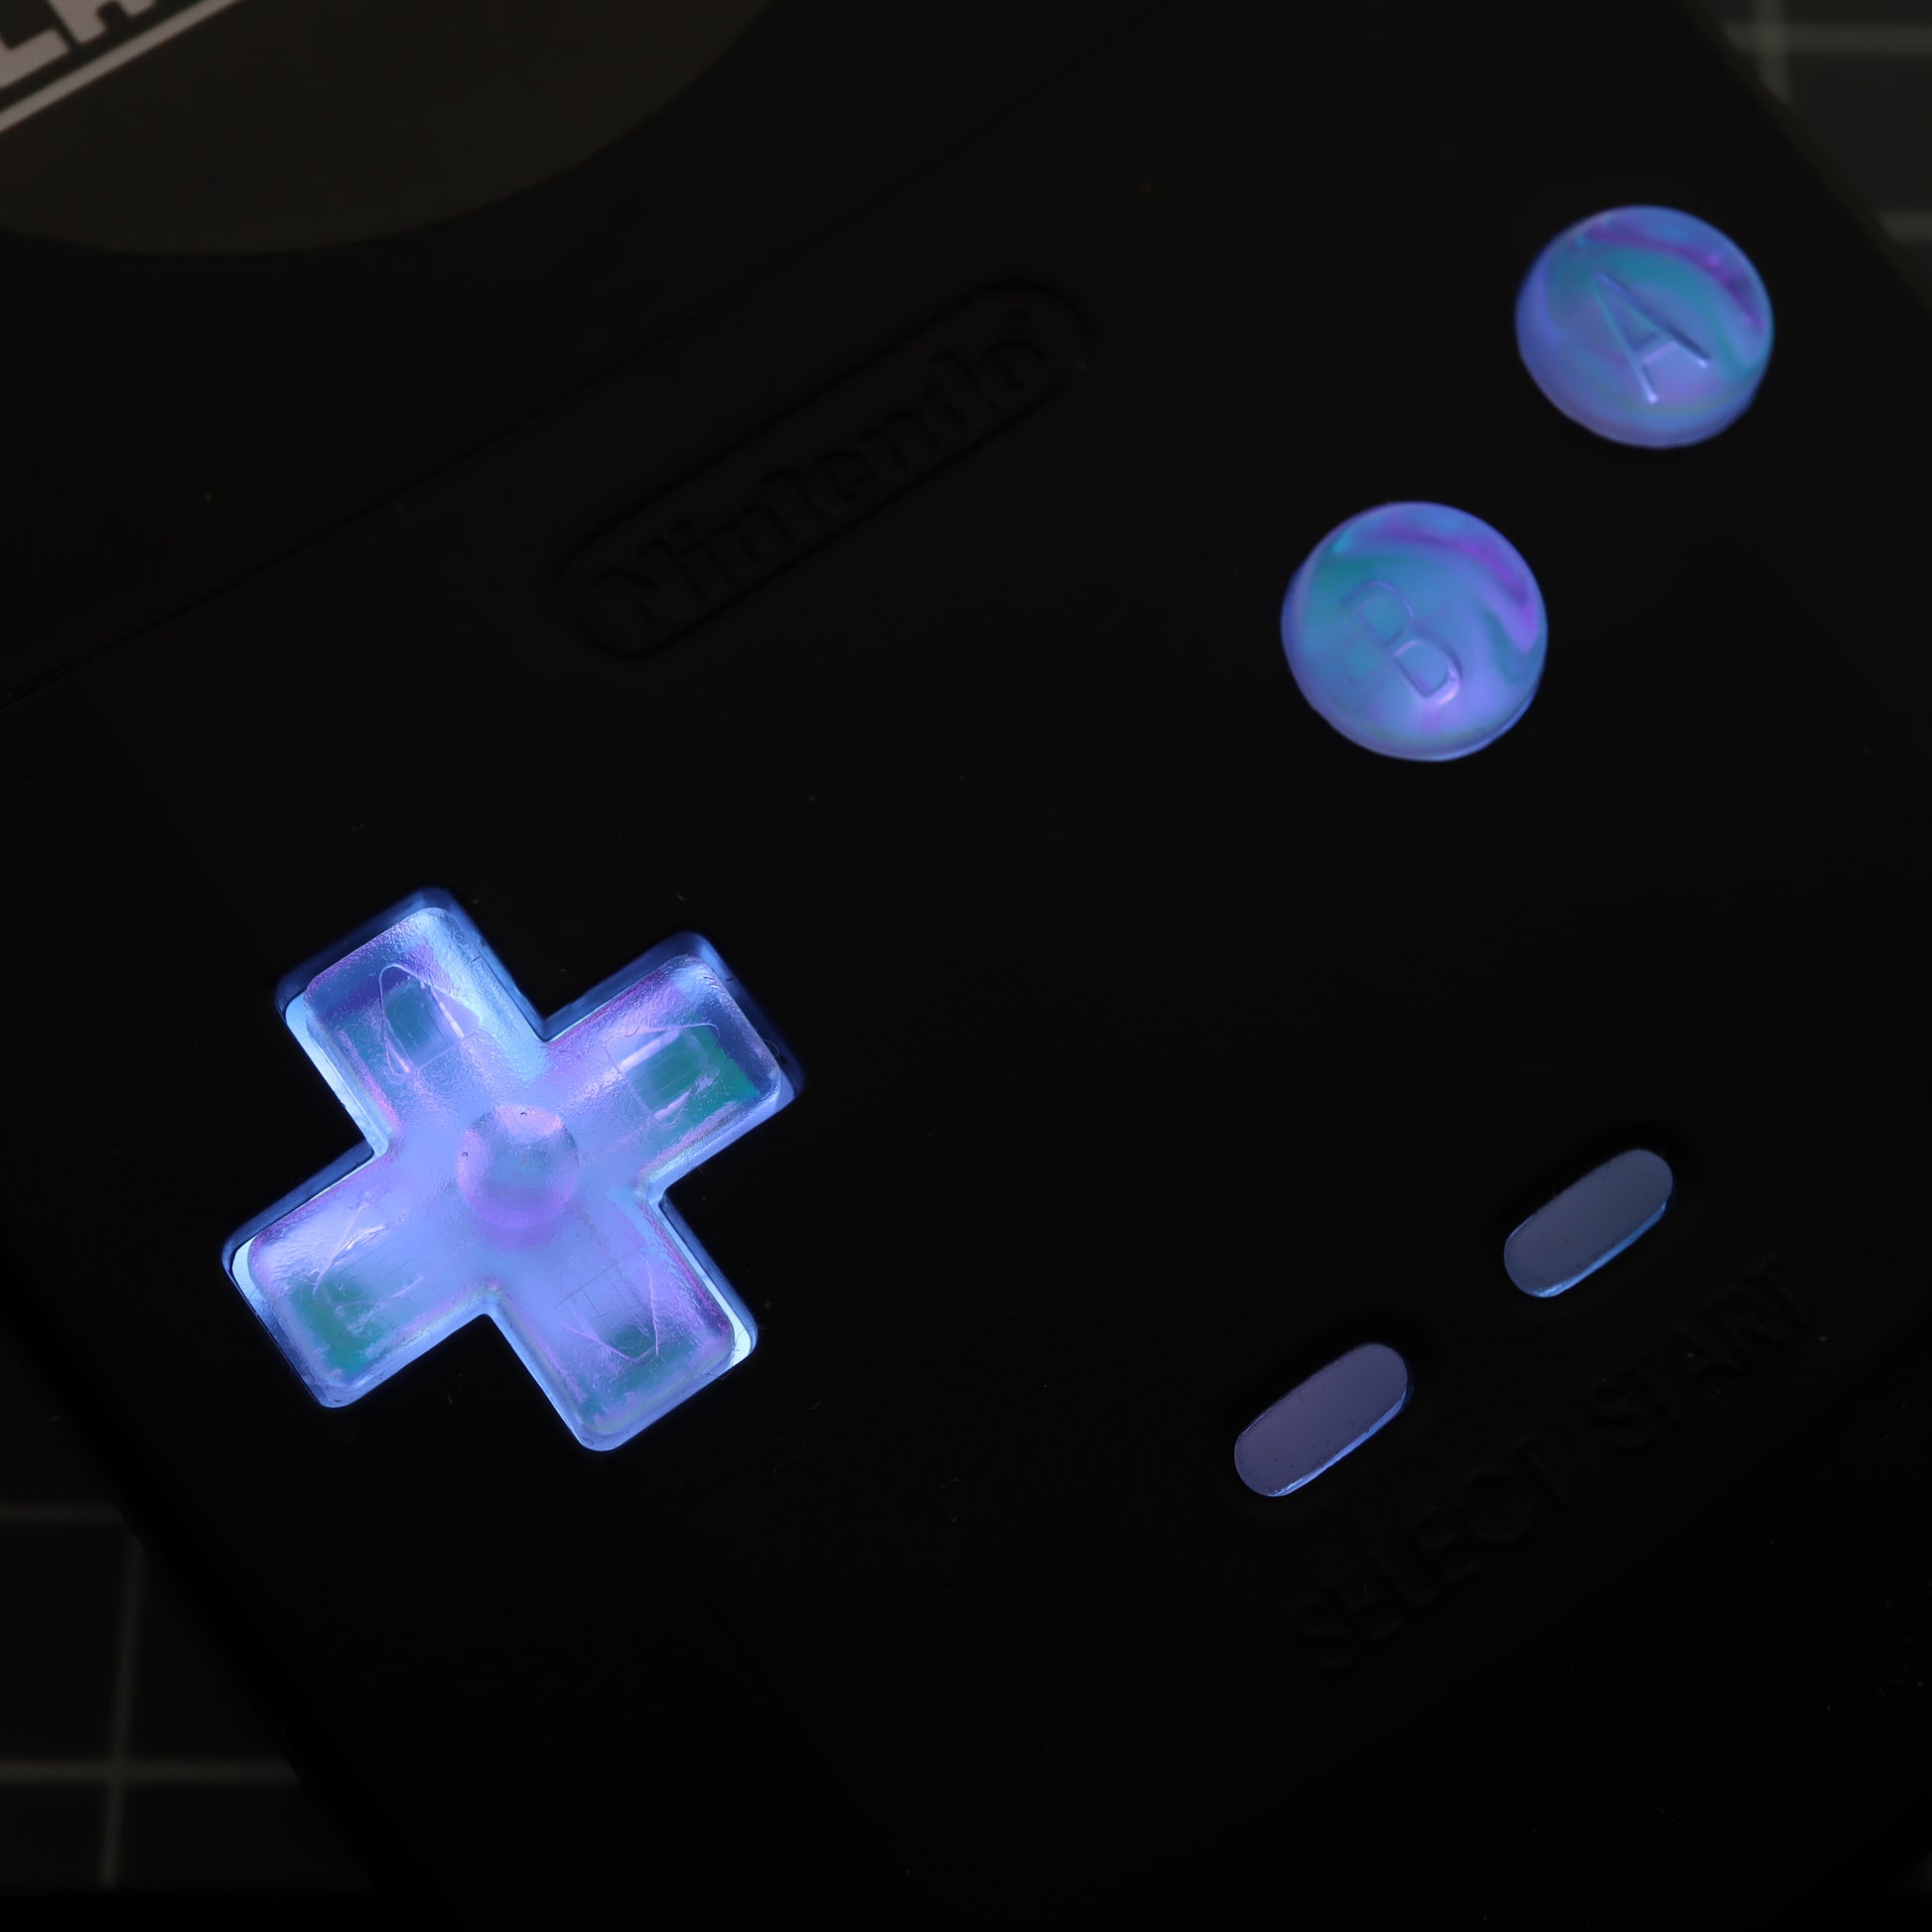 A black labfifteen Game Boy Color with glowing resin buttons.